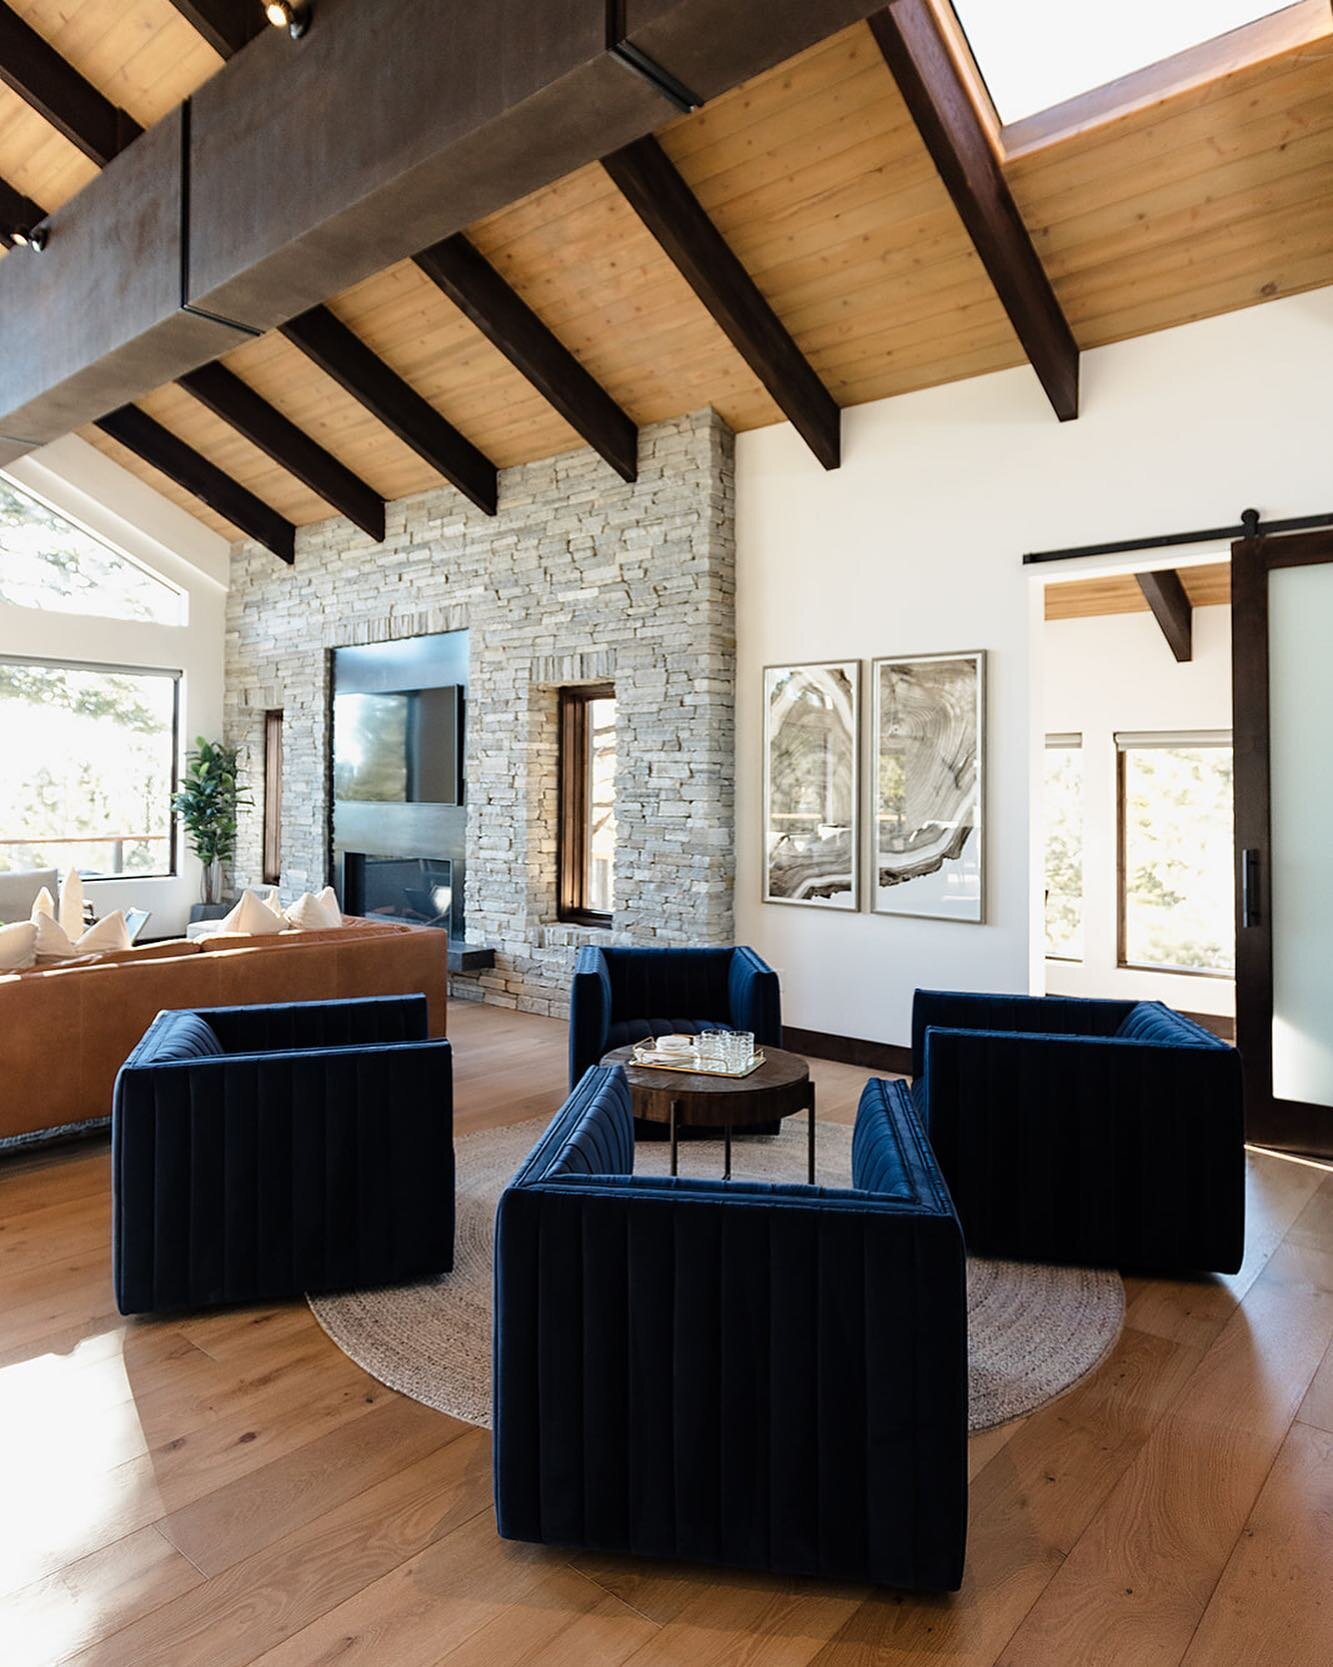 Our job in this project was to compliment the gorgeous design work of @alt.designtruckee by decorating the home with pieces that worked with the design vision Colette laid out in this Award-Winning remodel. 

This four-person seating vignette provide